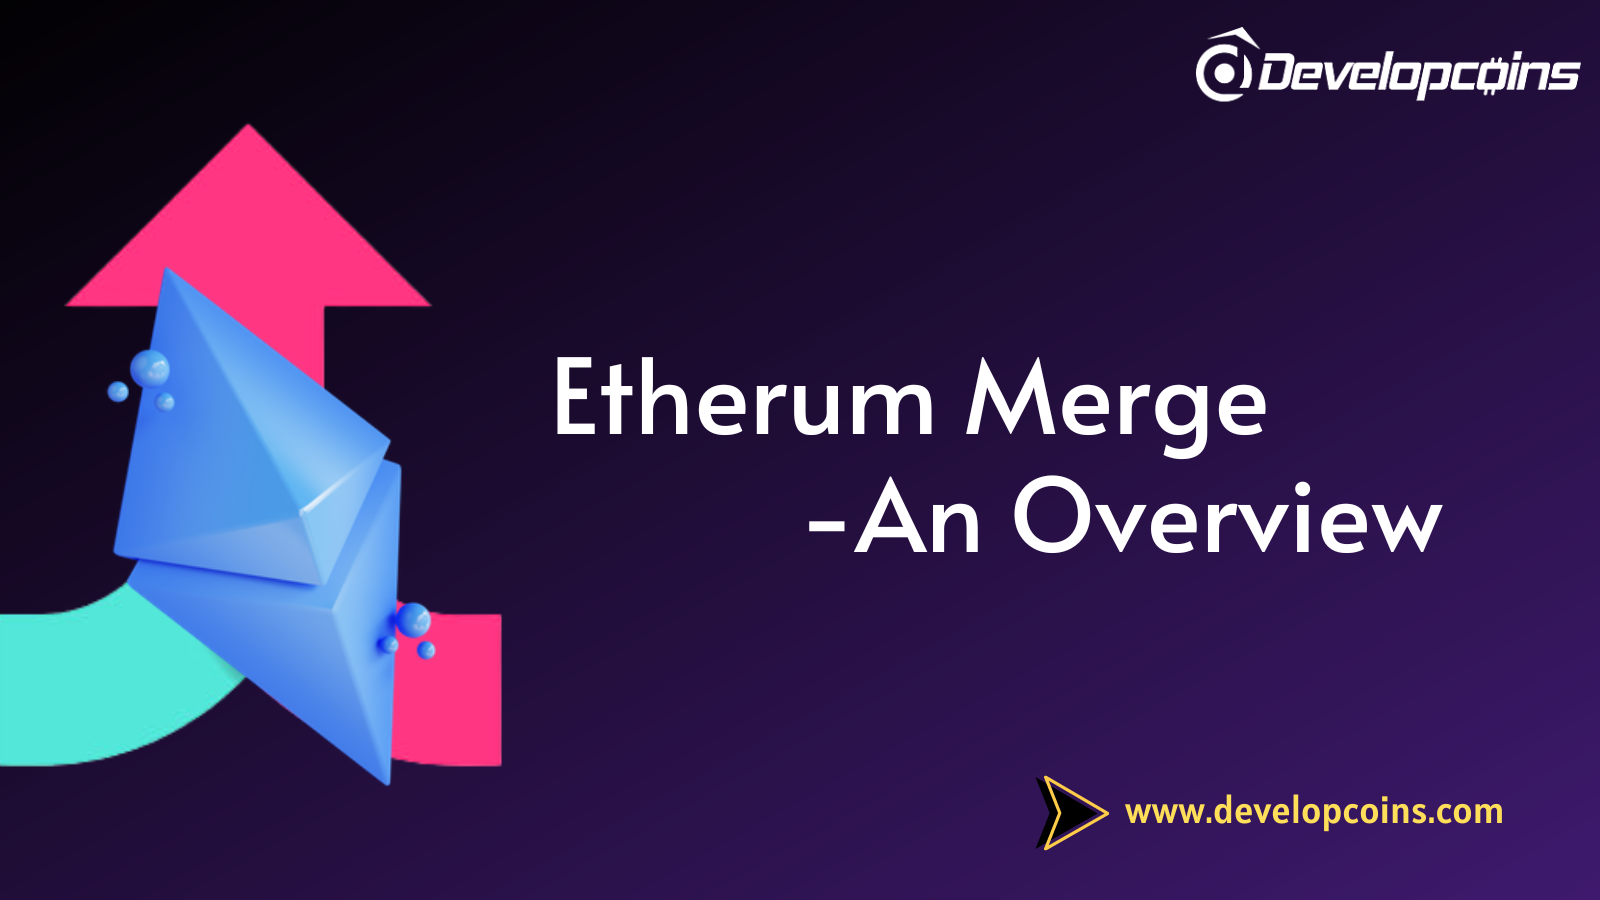 The Ethereum Merge: Why And What For